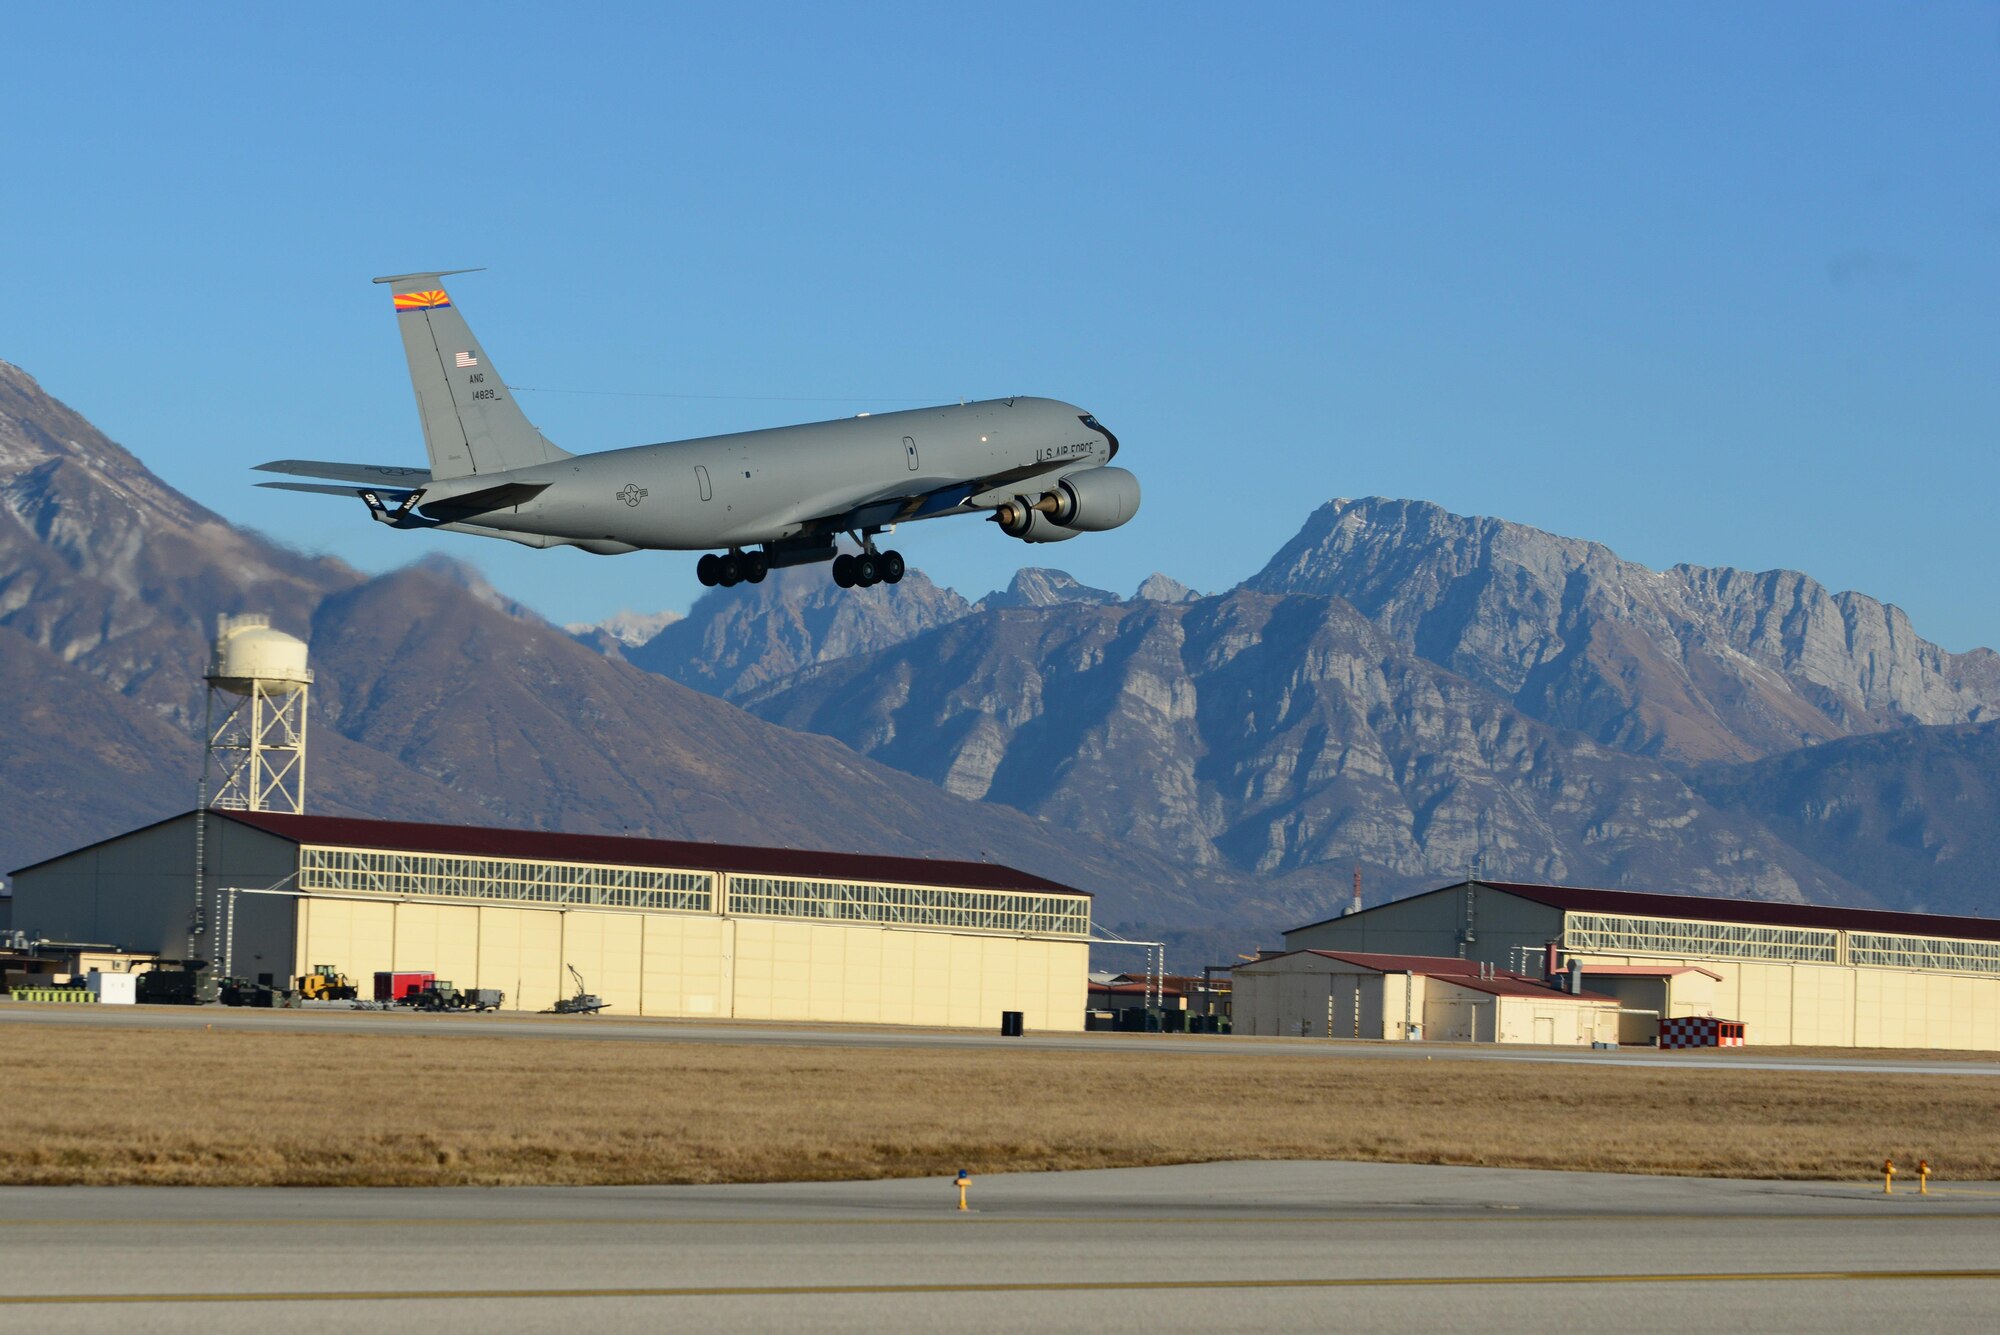 A KC-135 Stratotanker from the Arizona Air National Guard’s 161st Air Refueling Wing departs from Aviano Air Base, Italy on Jan. 21, 2016, for a flying training deployment in Souda Bay, Greece. The KC-135 joined fourteen F-16 Fighting Falcons and 280 Aviano Airmen in Souda Bay to participate in the training. (U.S. Air Force photo by Staff Sgt. Krystal Ardrey)